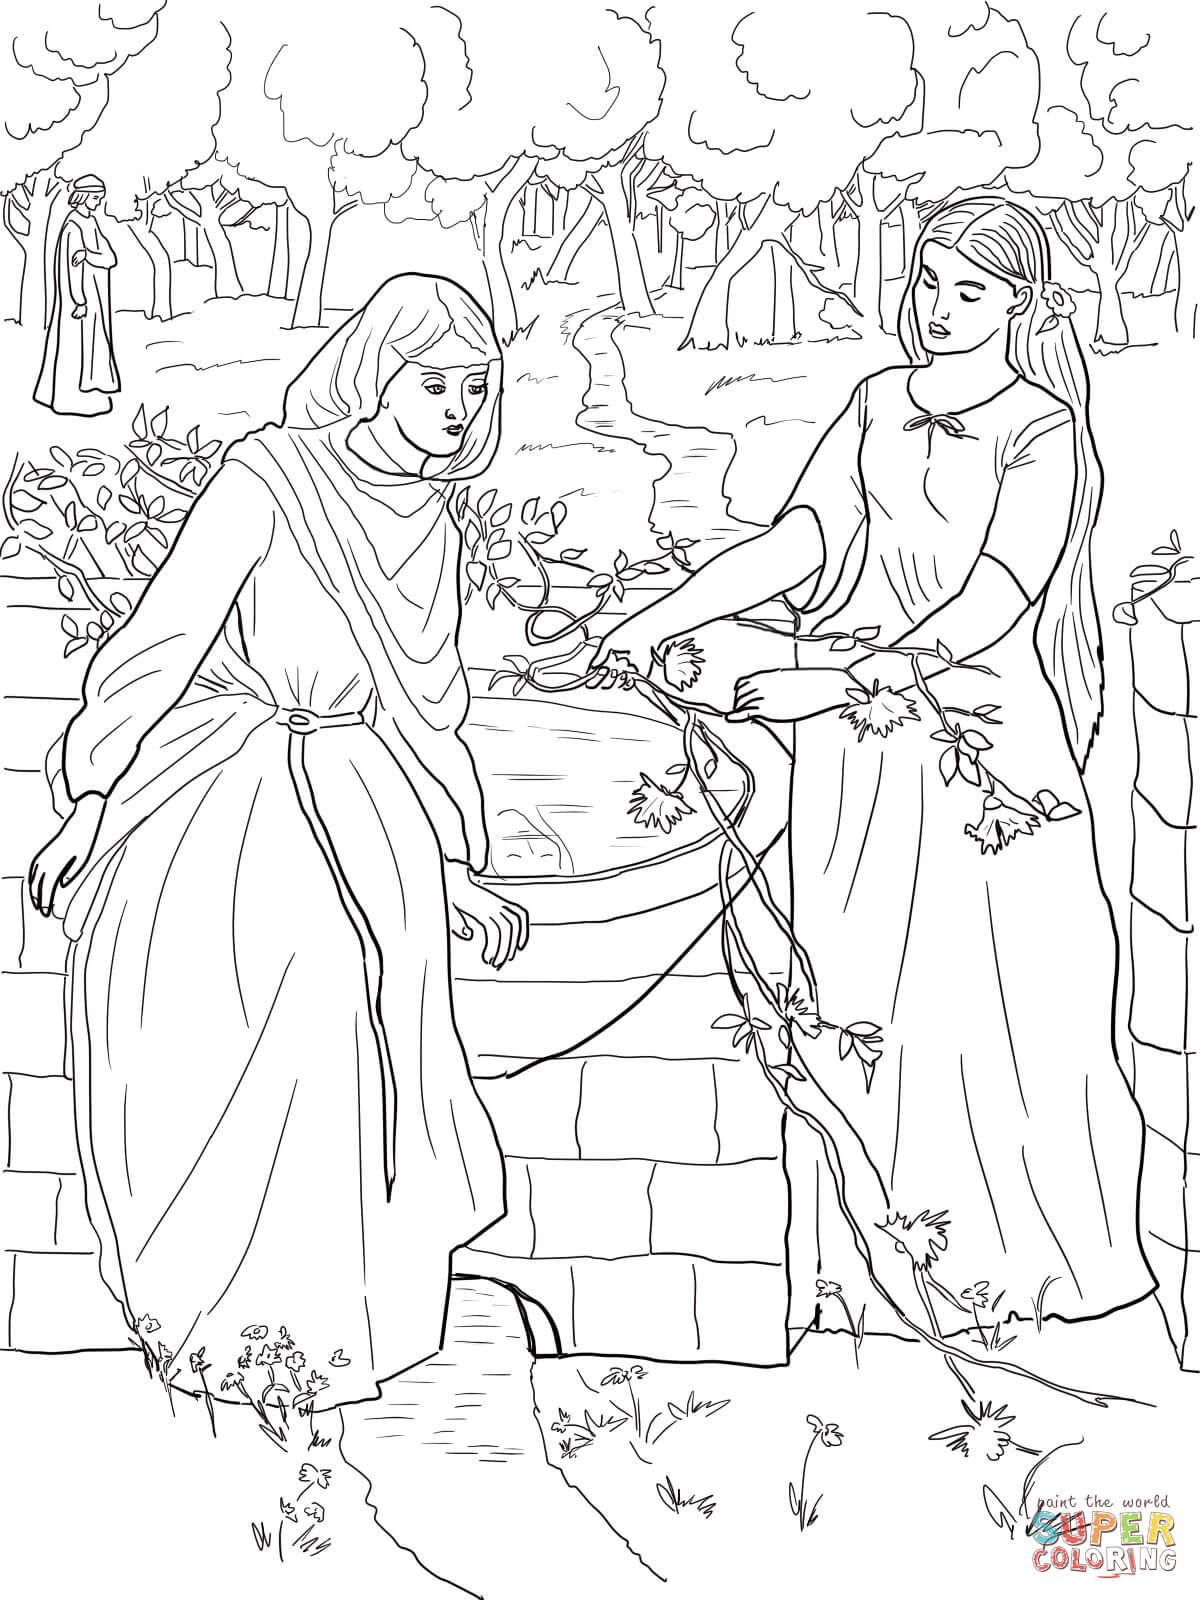 Jacob and Esau coloring page | Free Printable Coloring Pages